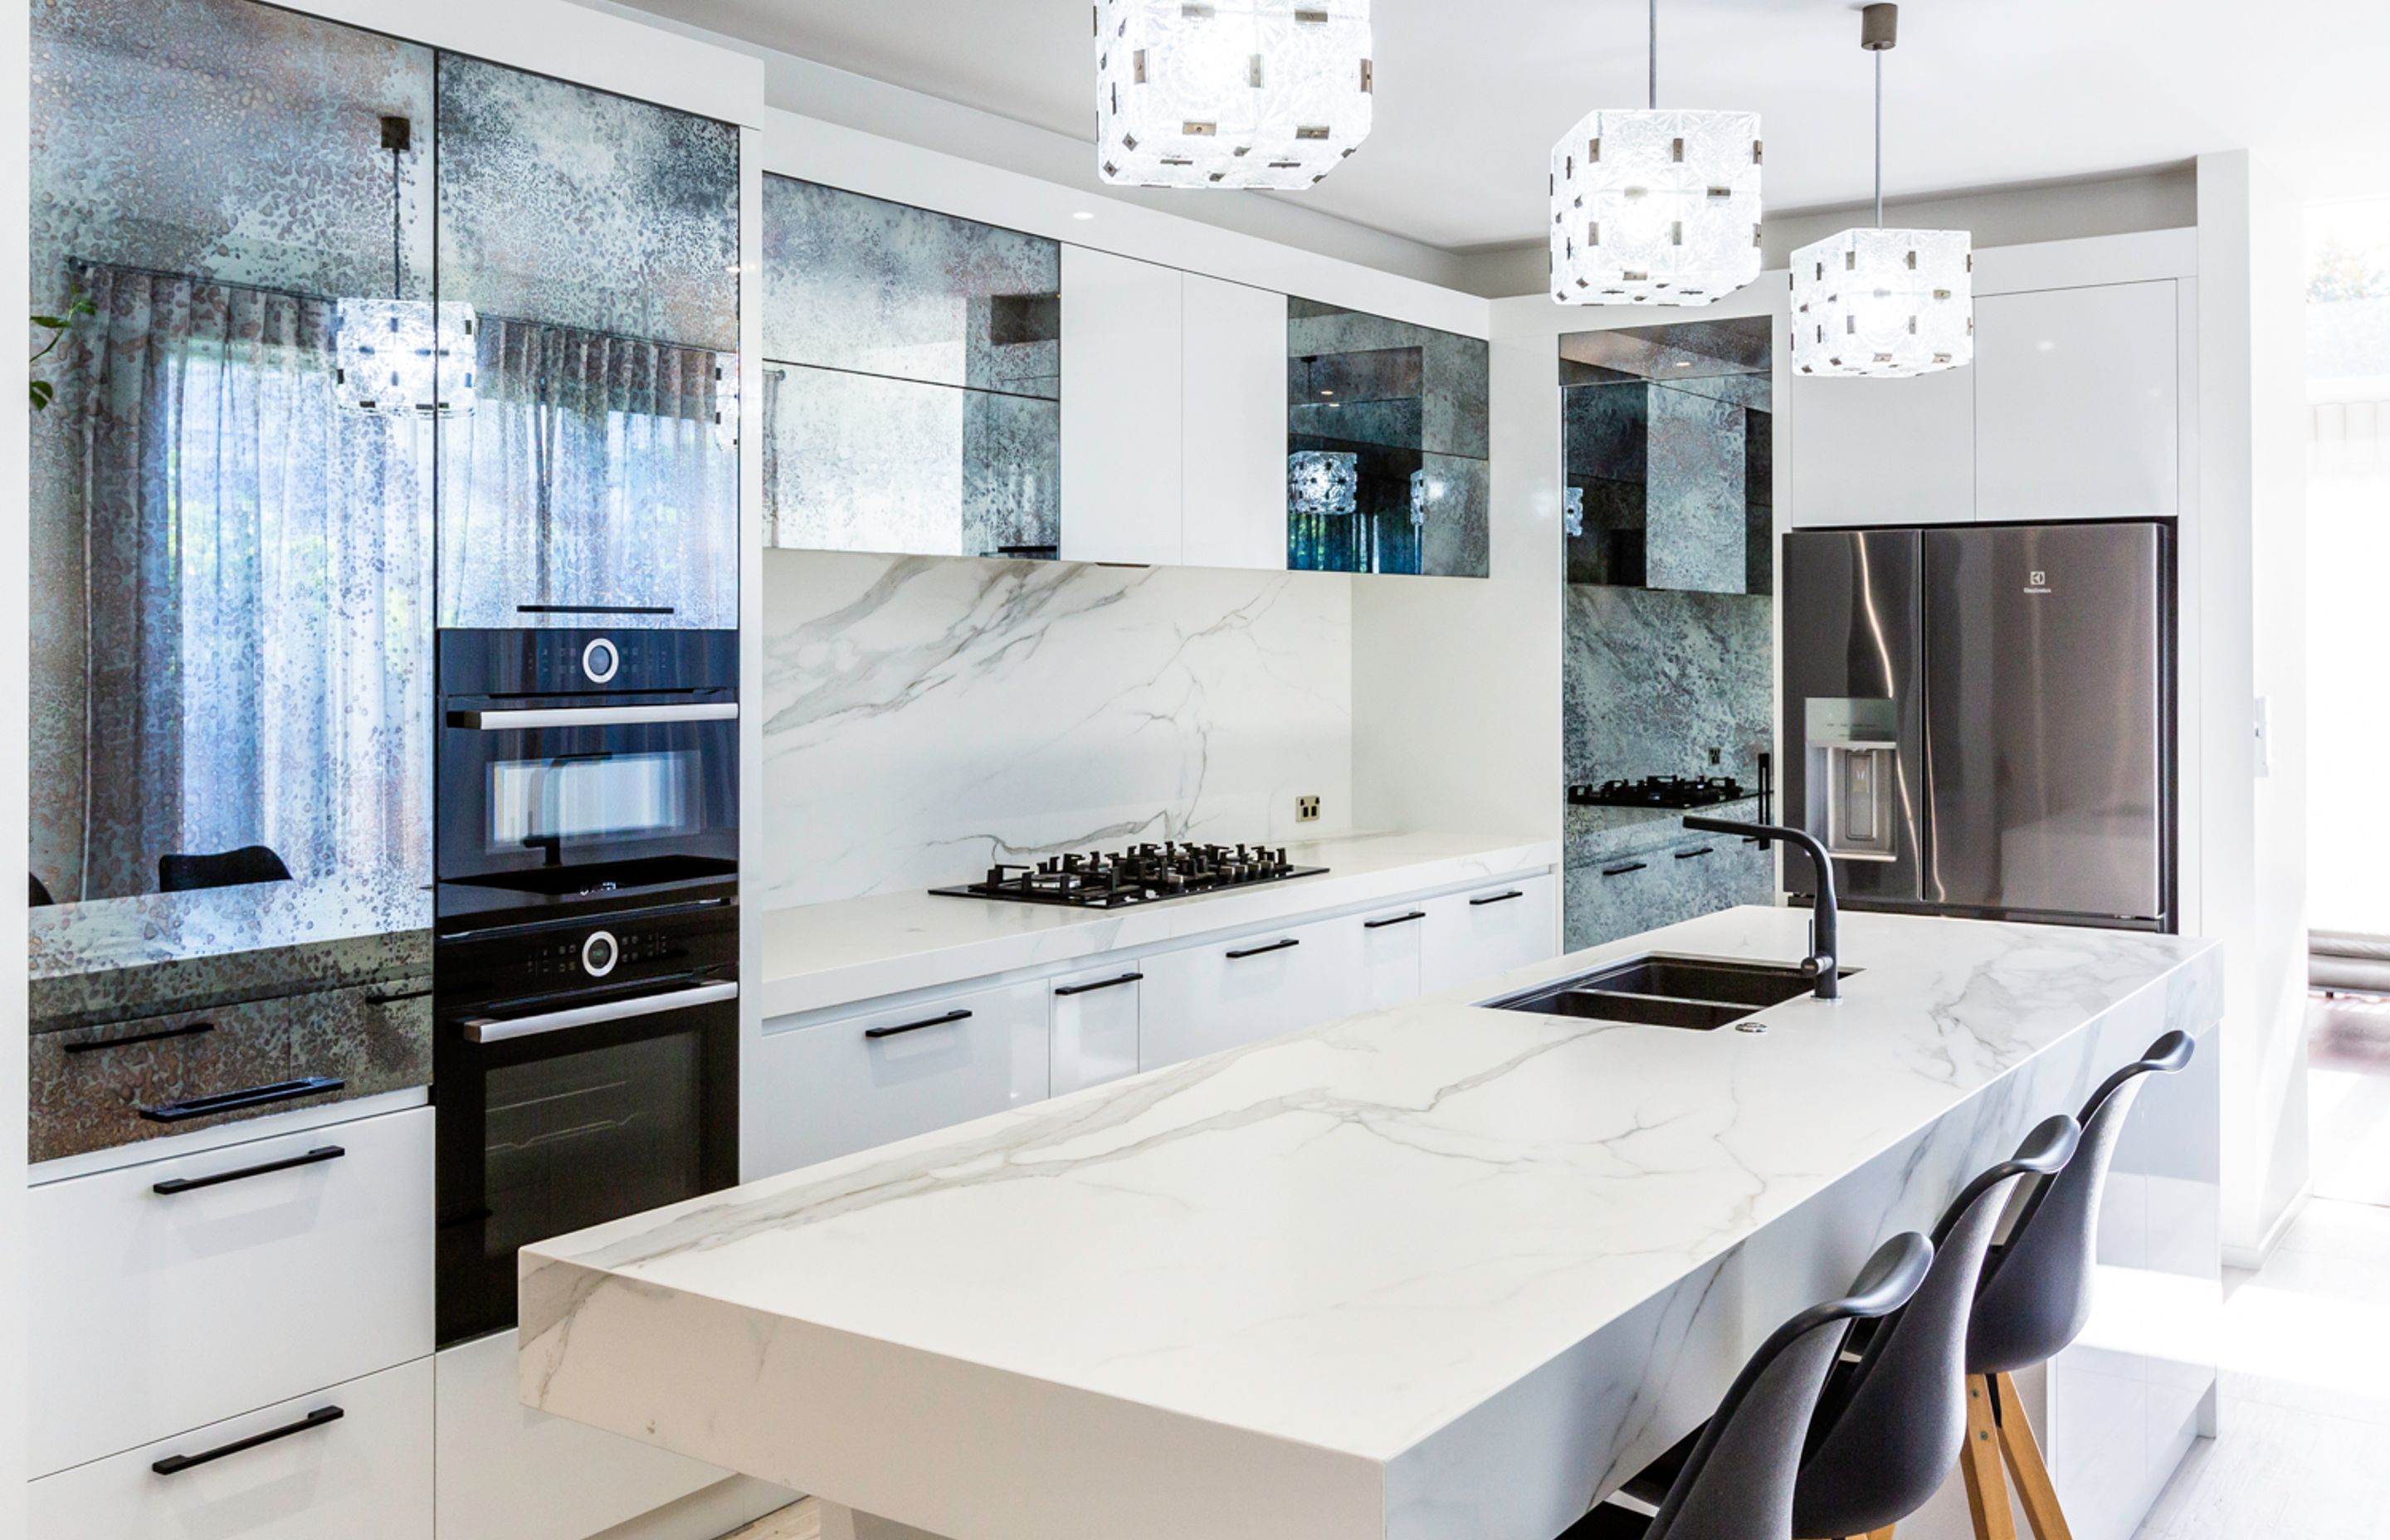 This kitchen demonstrates how versatile antique mirror is, working in easily  with a contemporary aesthetic.